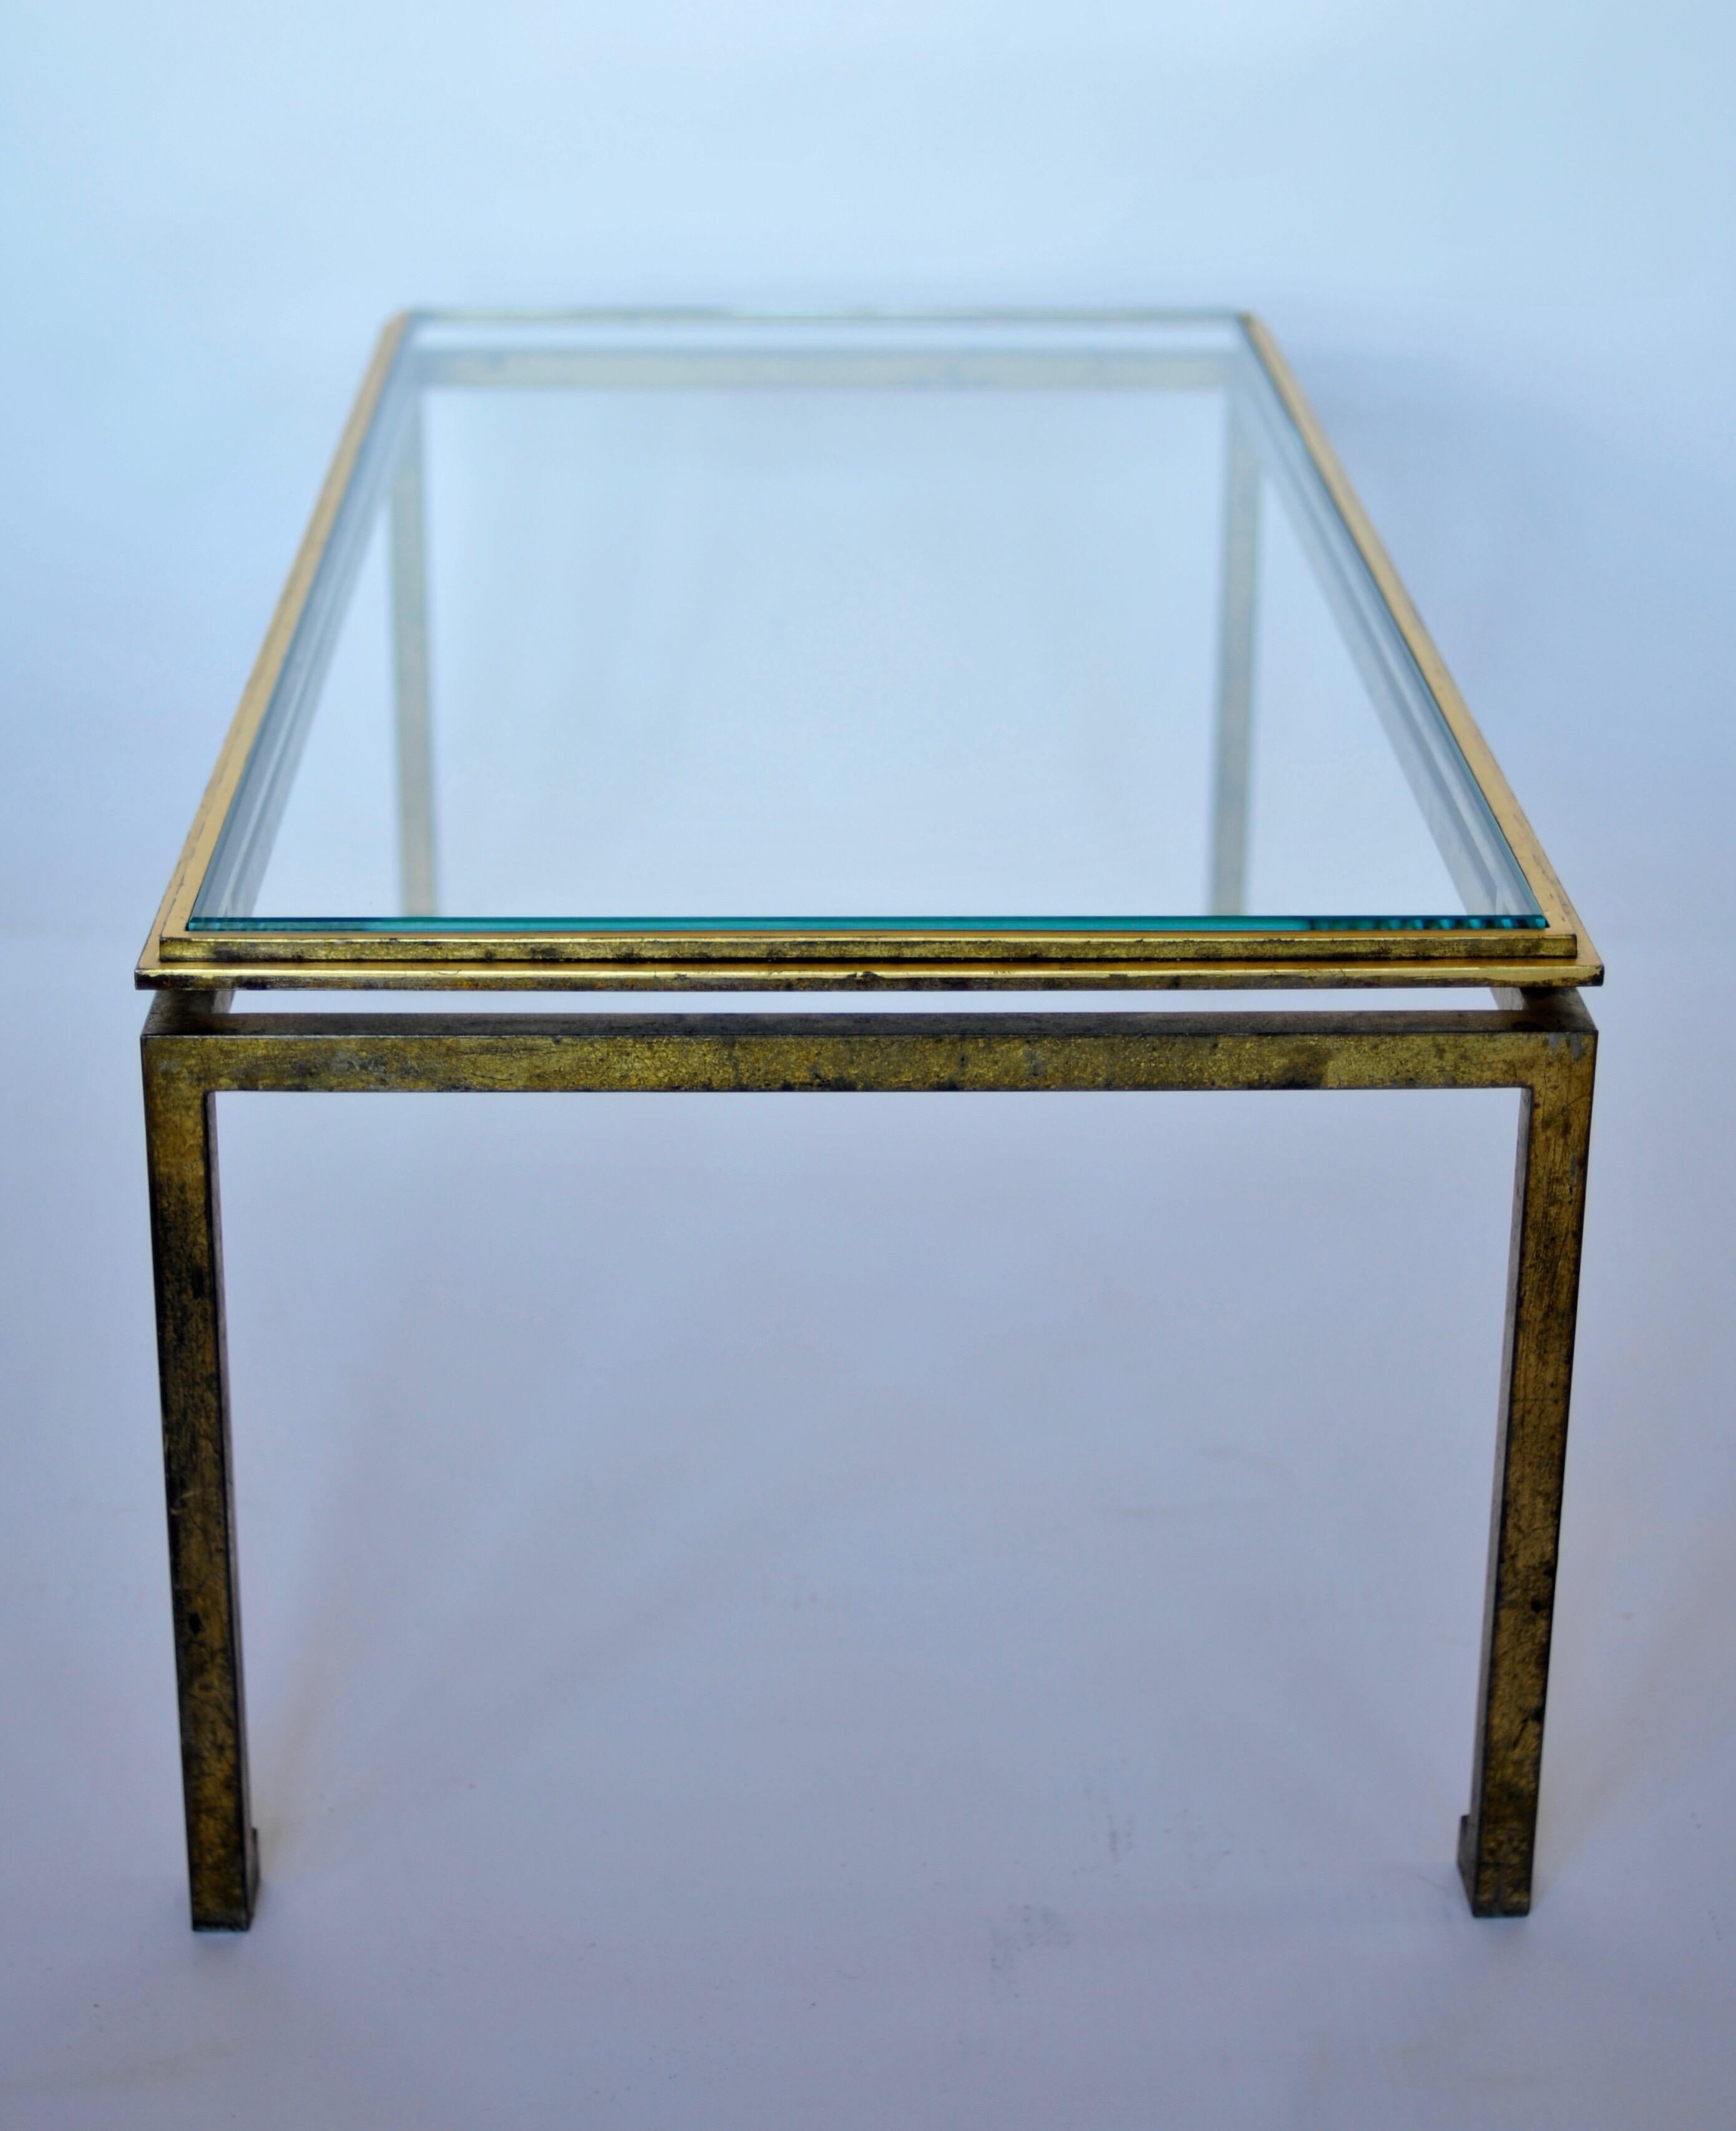 Large French Modern Neoclassical, Gilt Iron Coffee Table, Maison Ramsay In Good Condition For Sale In New York, NY